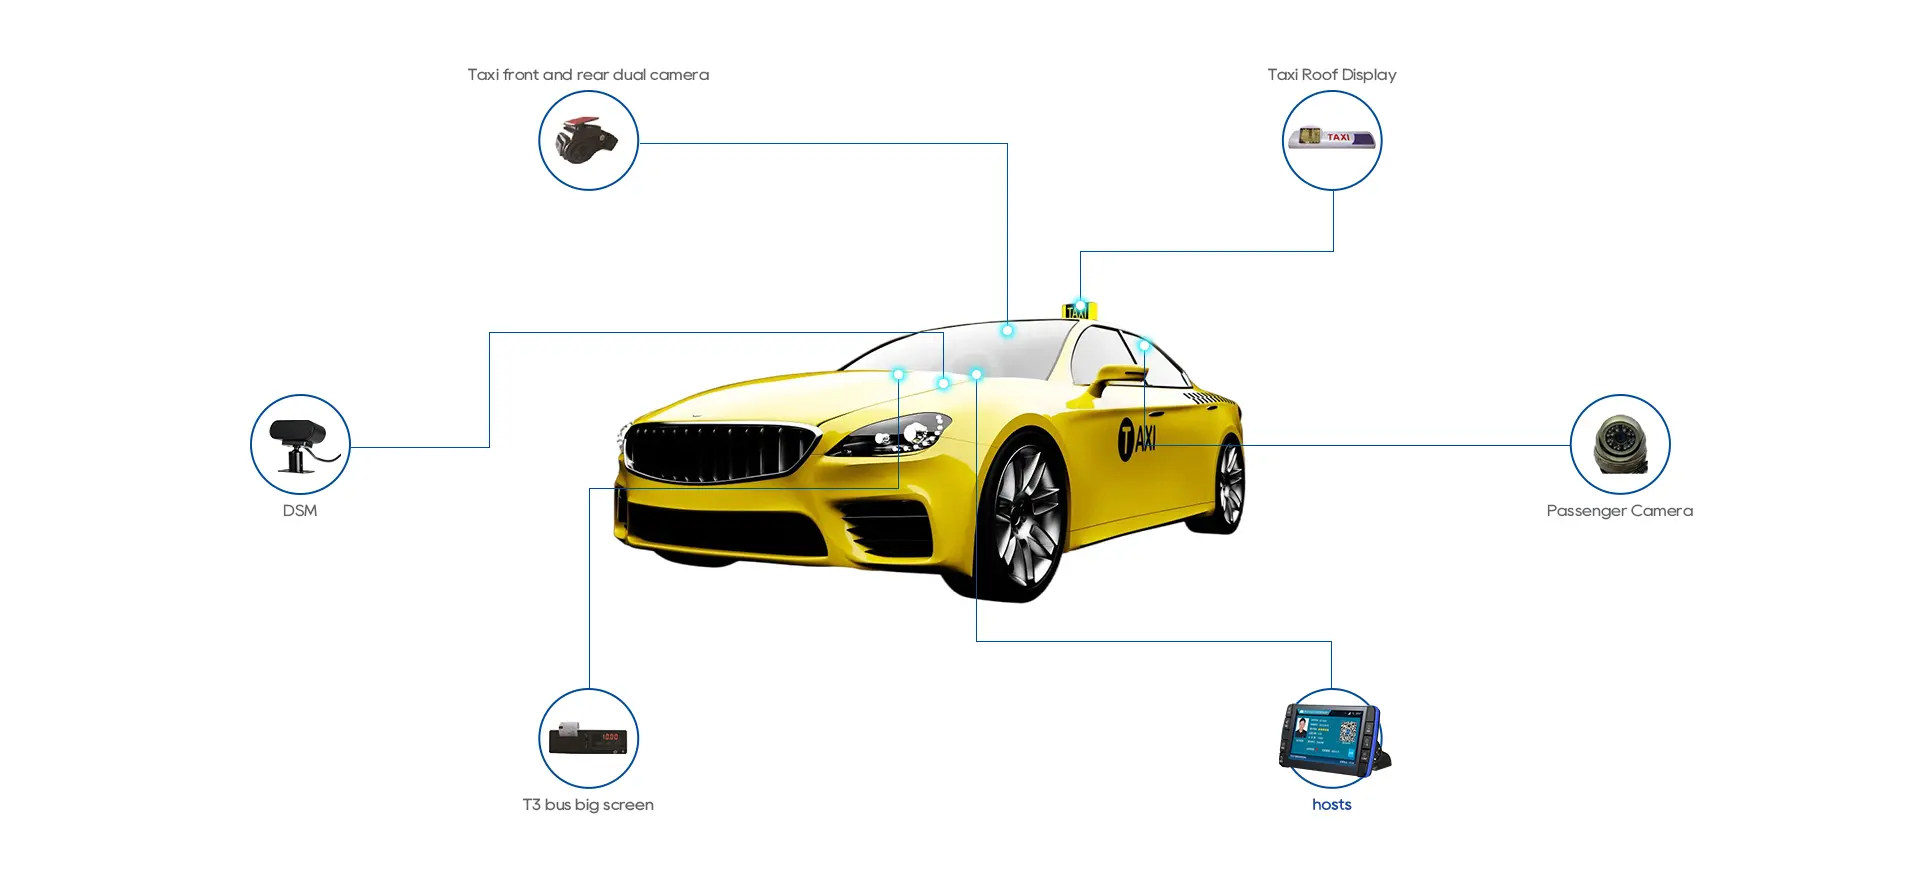 Taxi Tracking management system